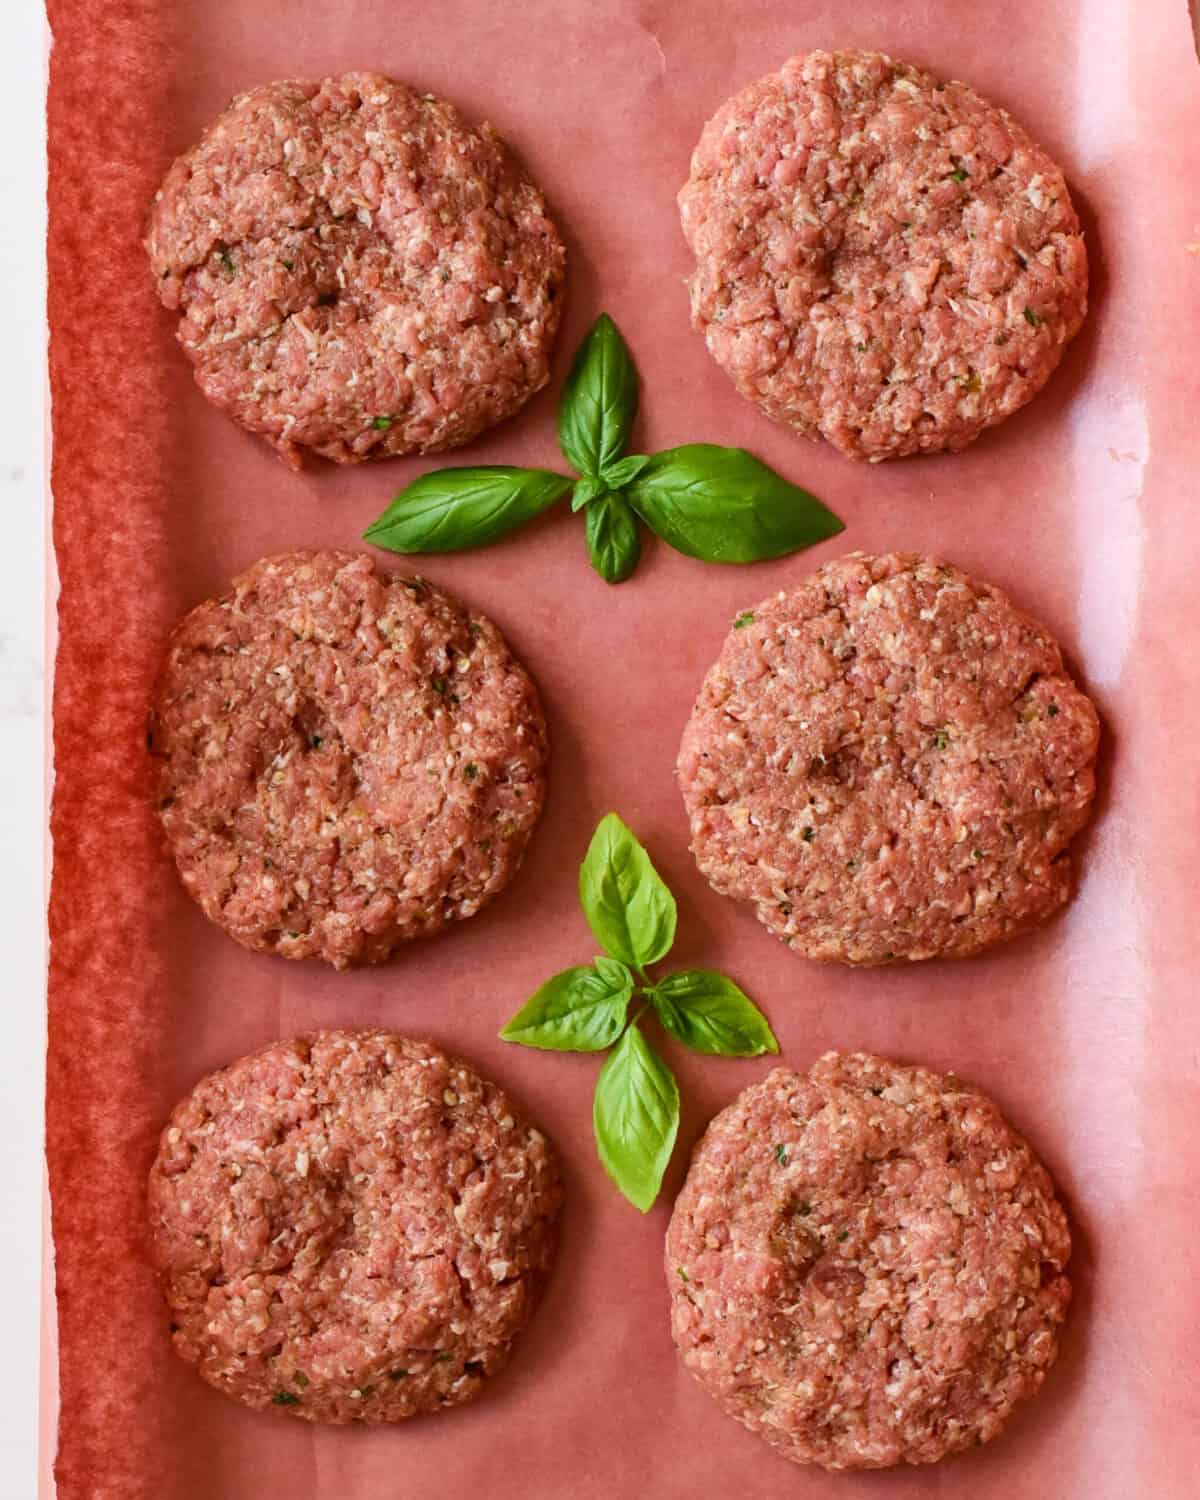 Six pork patties with indents in the middle to keep the burgers from puffing up when cooked. Basil leaves in between the patties.